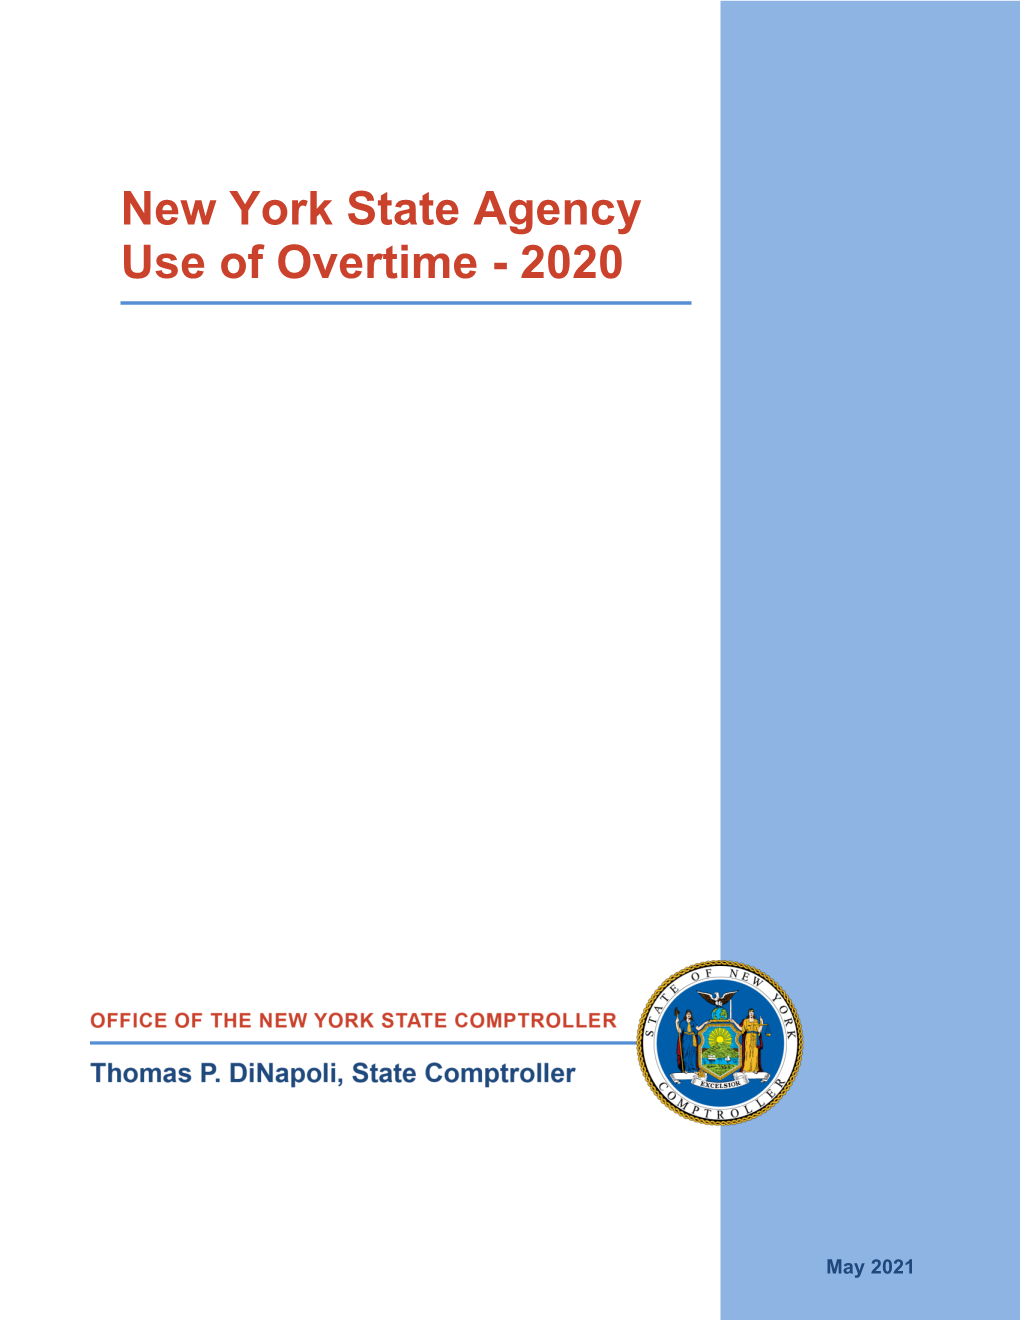 New York State Agency Use of Overtime - 2020